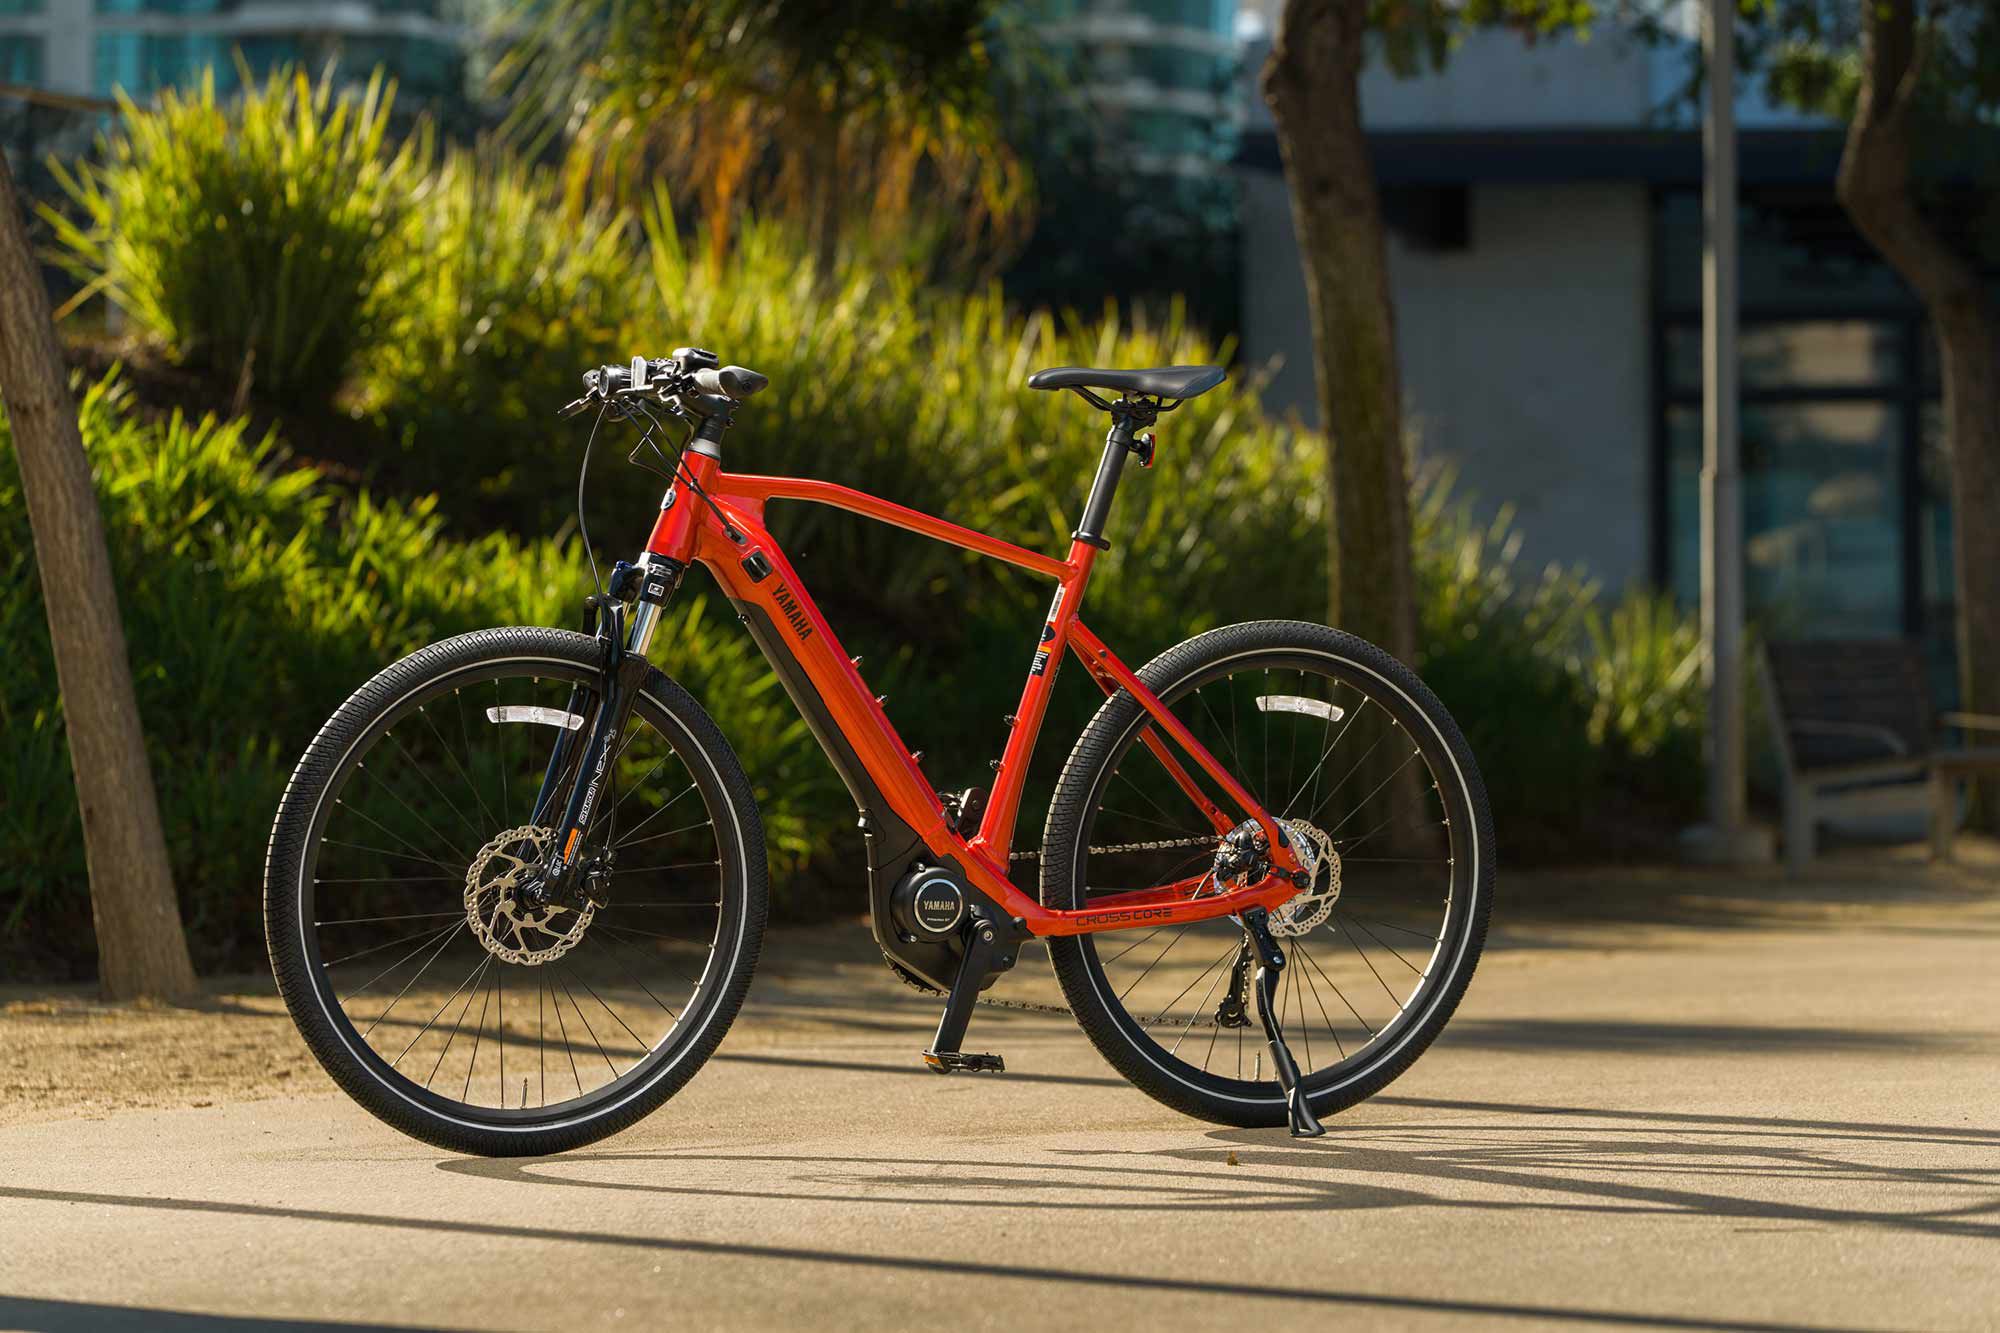 The CrossCoreRC is designed for recreational cyclists seeking a pedal-assist bike that they can run errands on or get outside and have some fun.